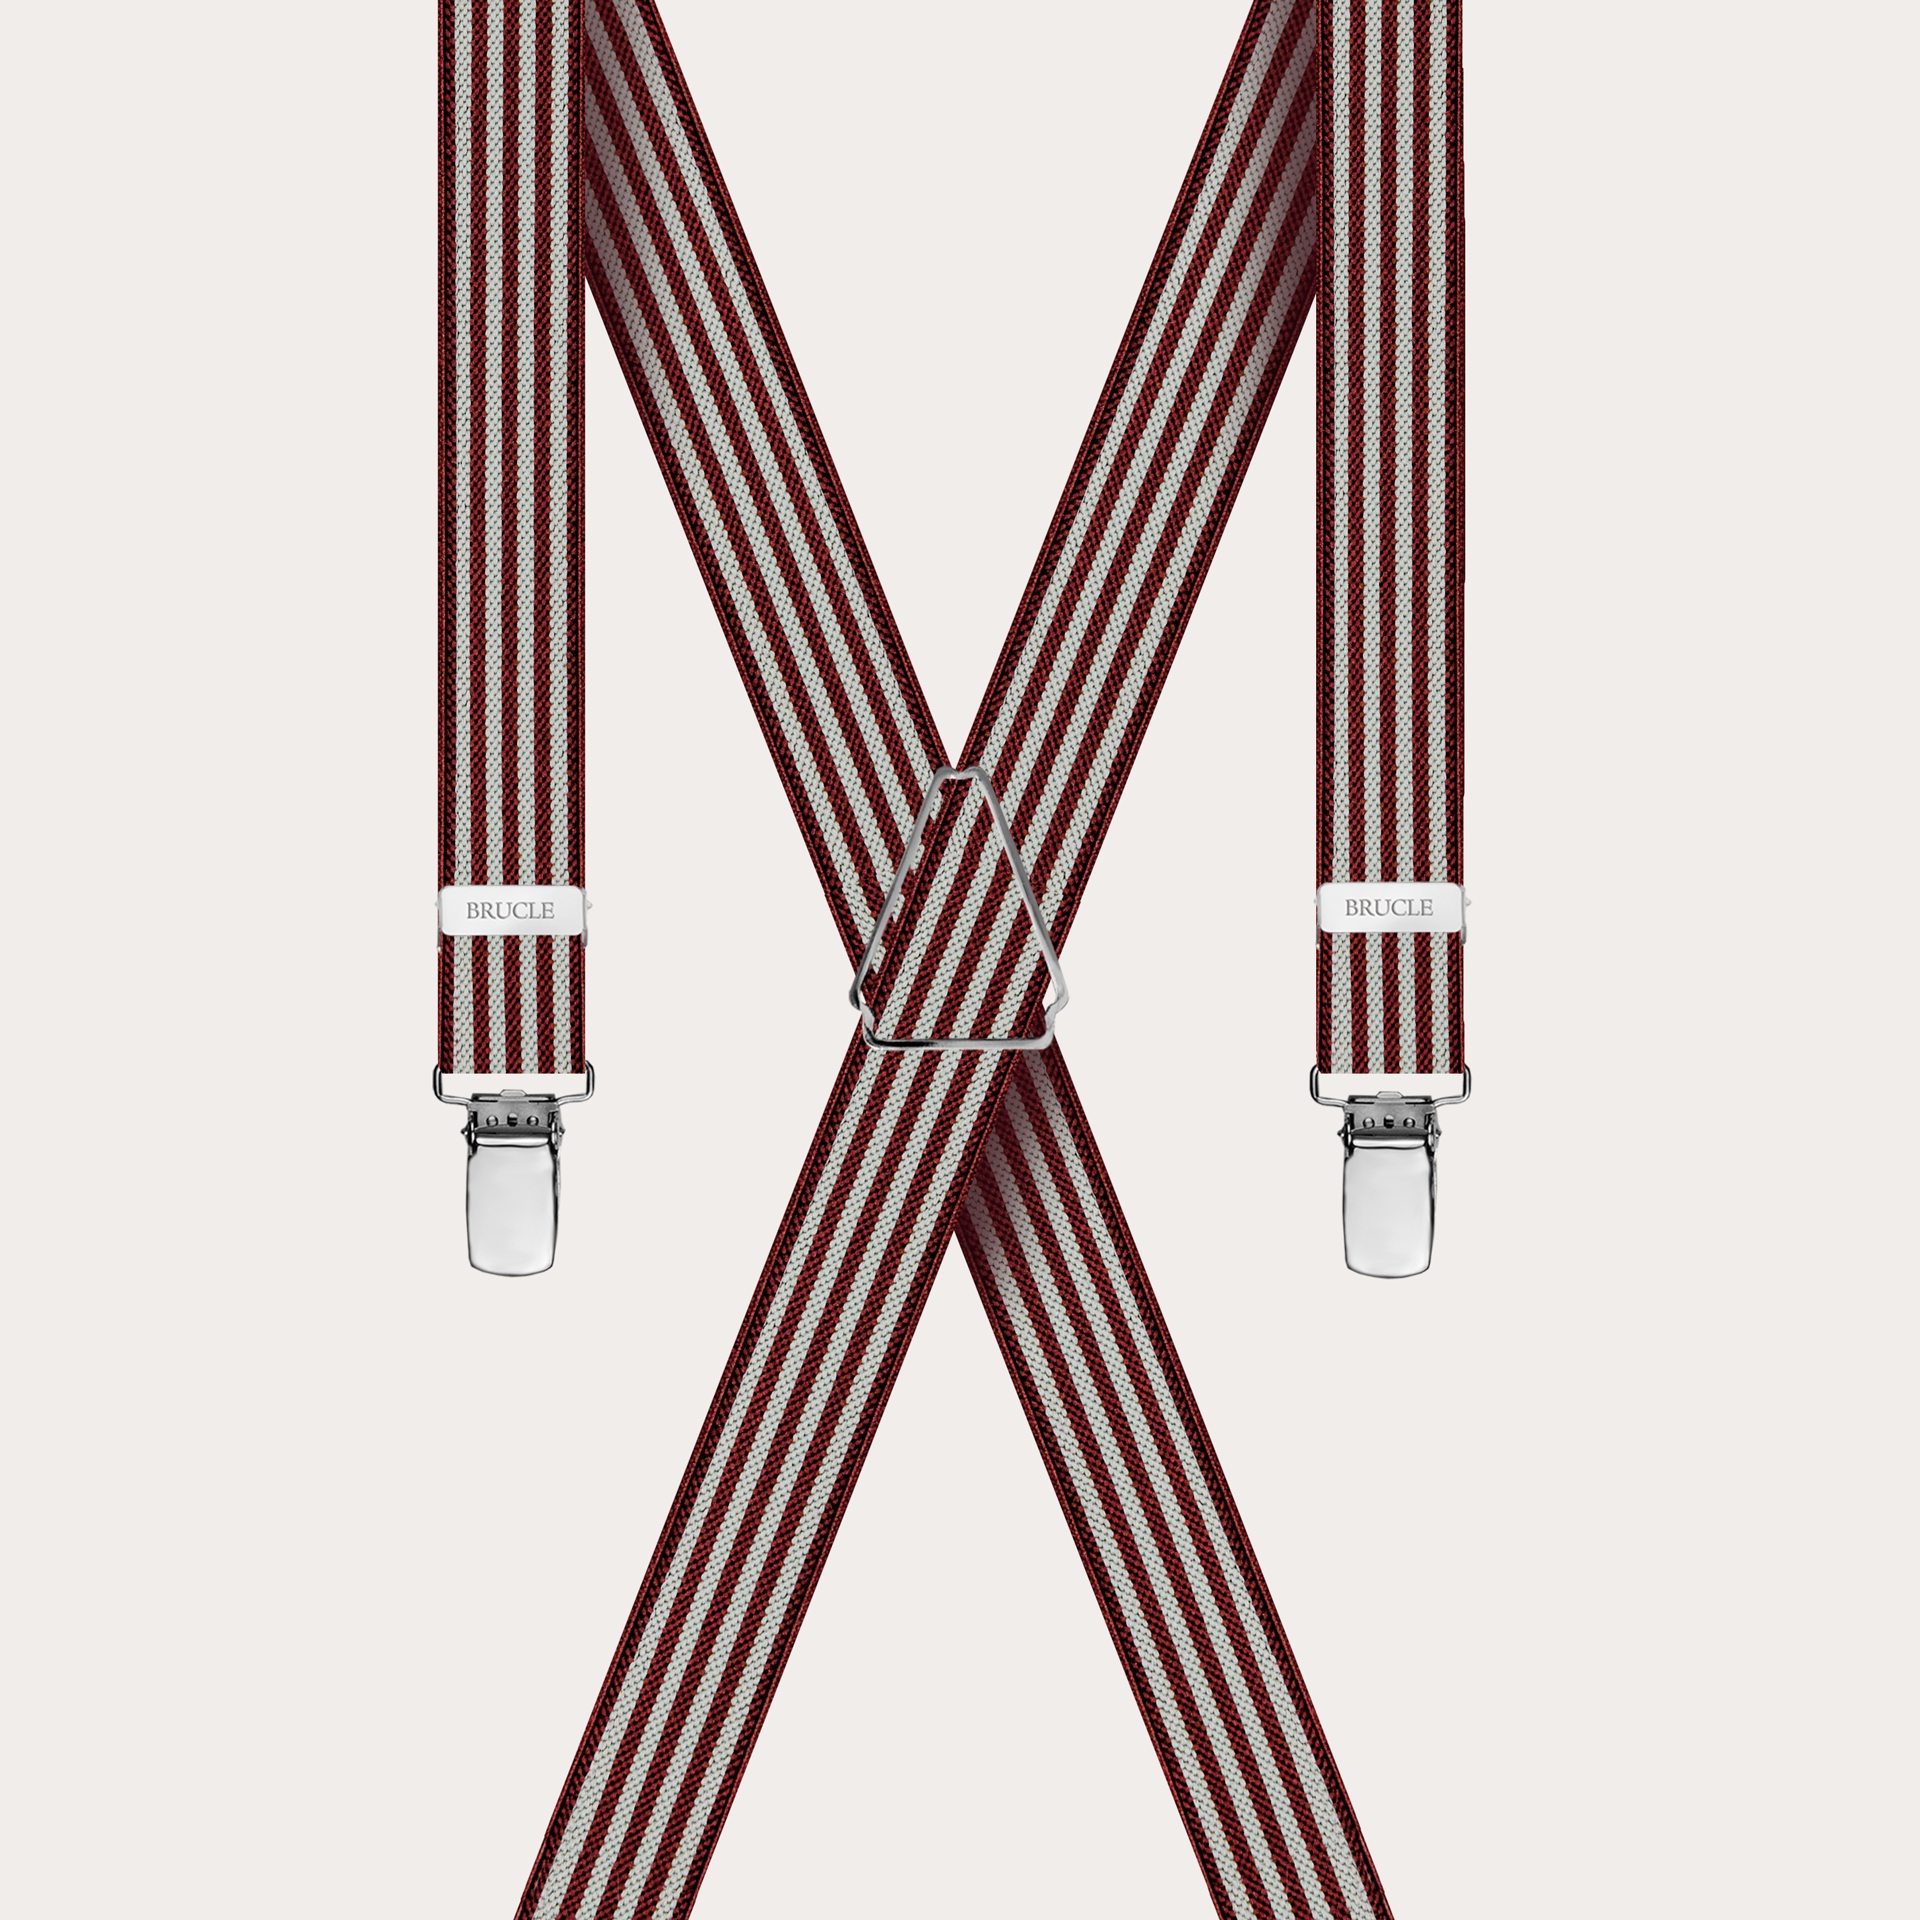 BRUCLE X-shaped suspenders with striped pattern, burgundy and pearl